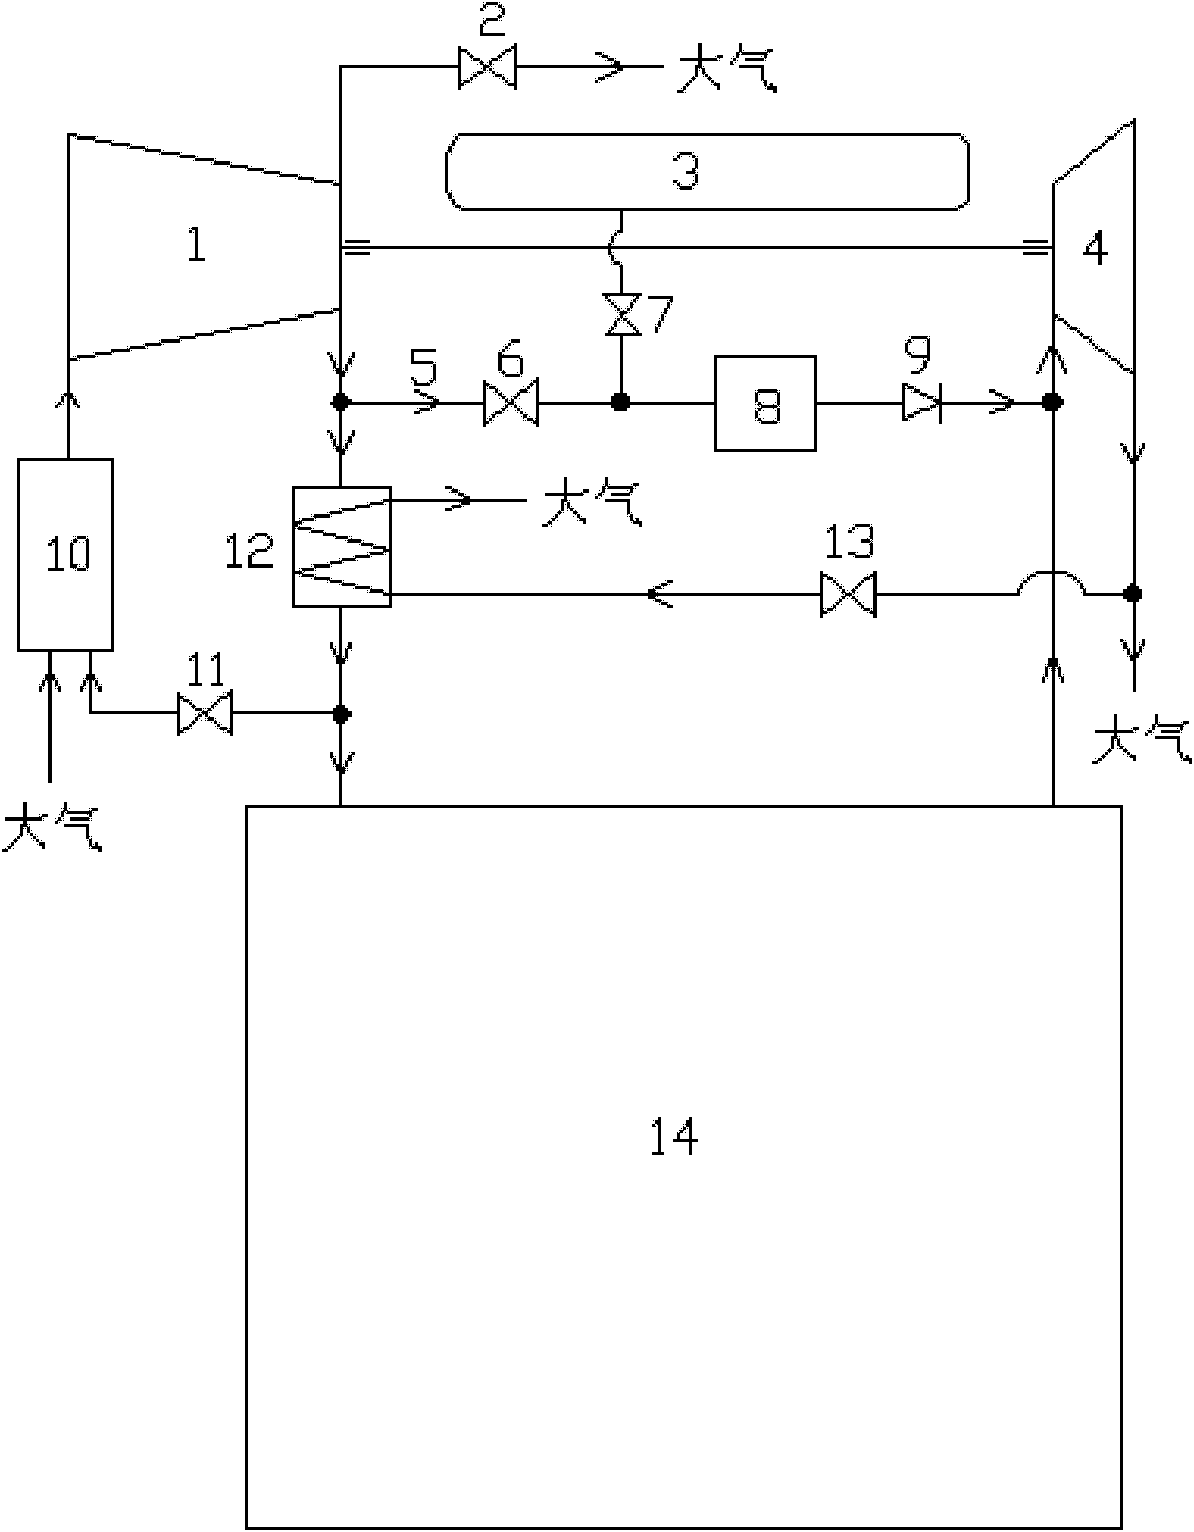 Bypass afterburning composite regenerative turbo supercharging system of boiler